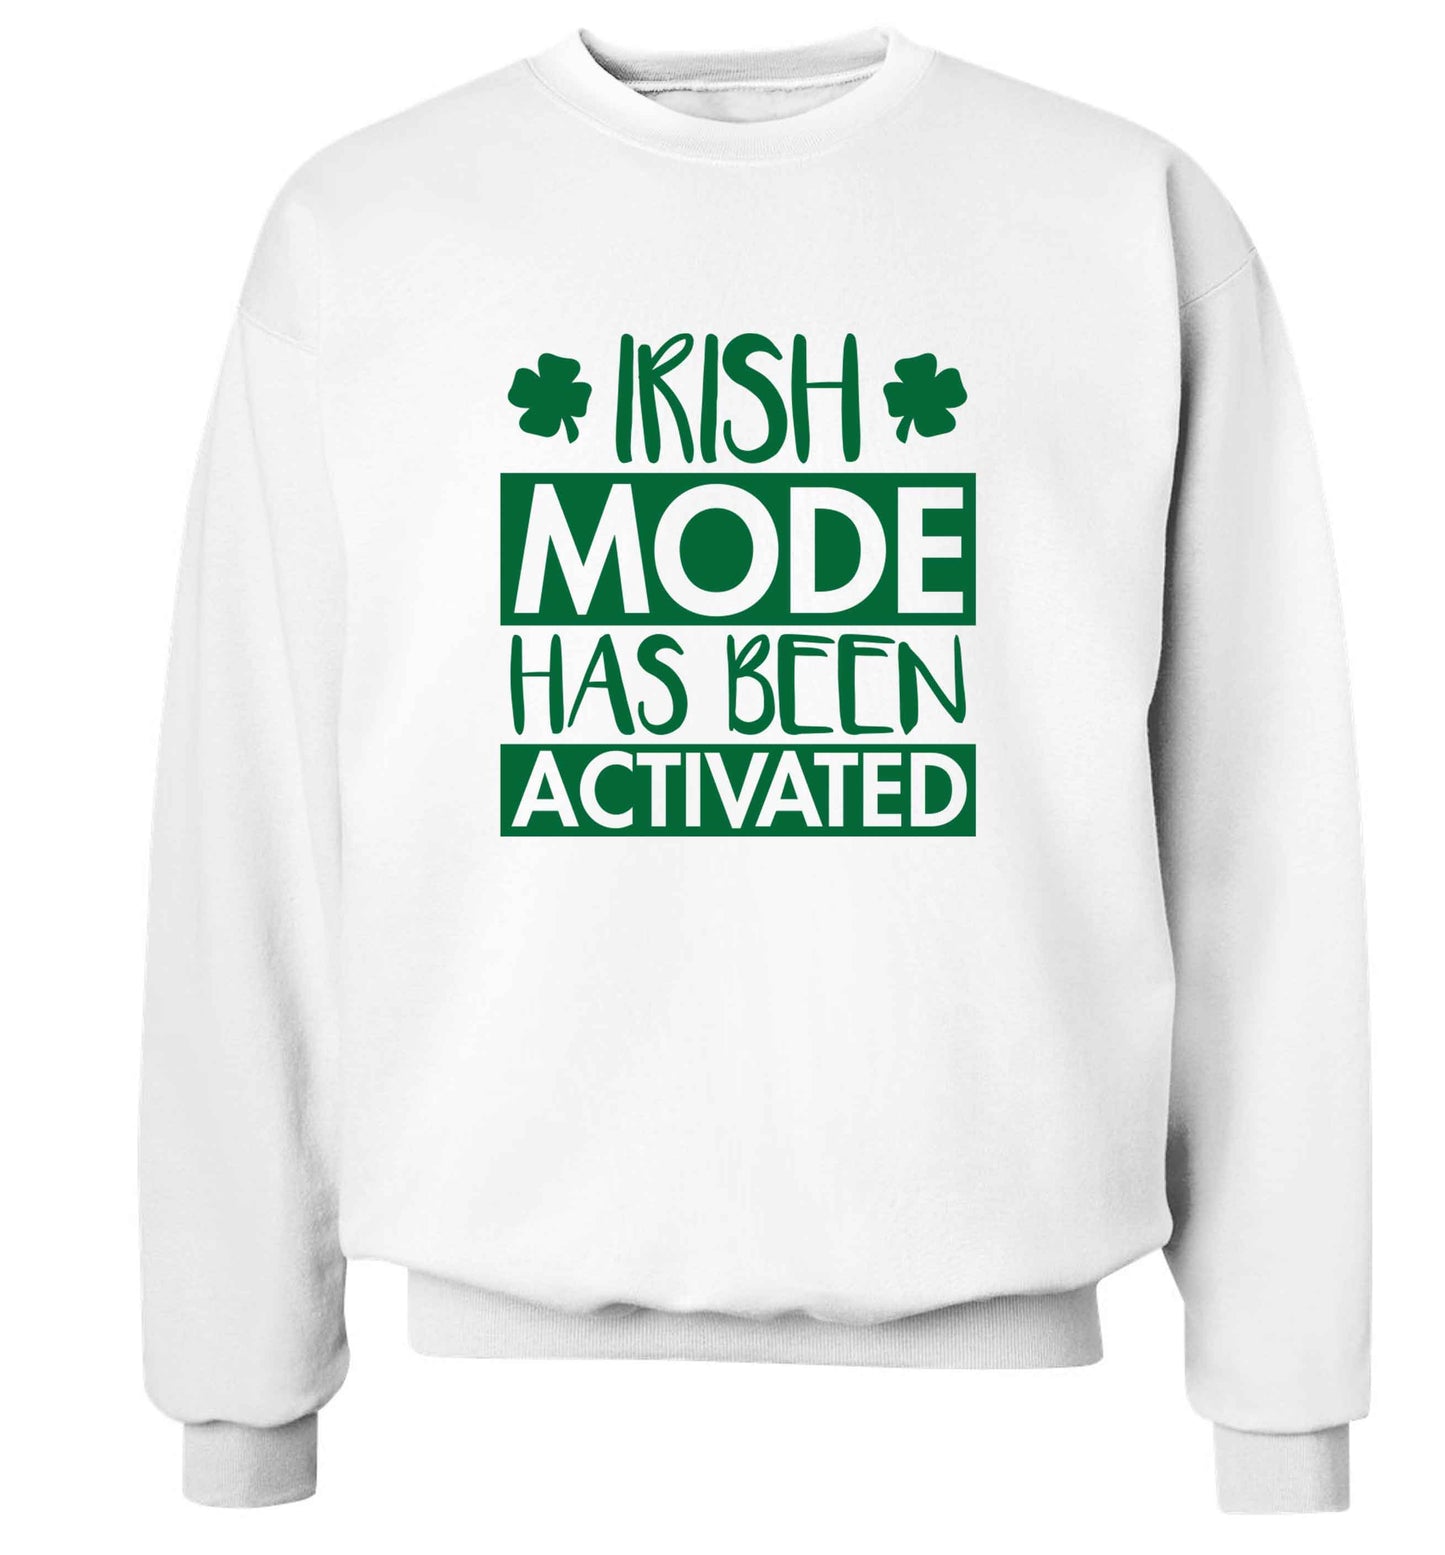 Irish mode has been activated adult's unisex white sweater 2XL